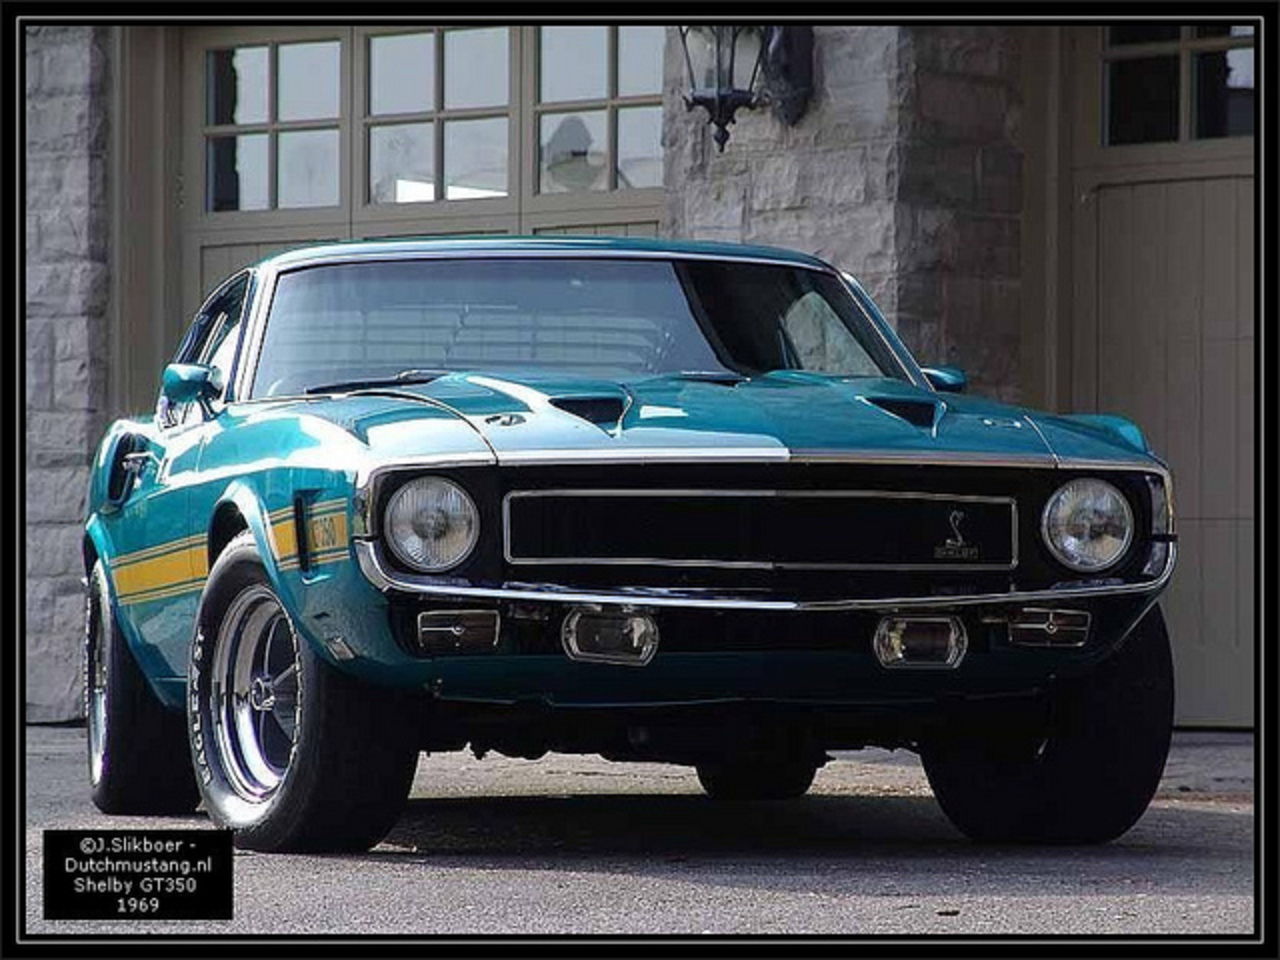 1969 Ford Mustang Shelby GT350 - 001 | Flickr - Photo Sharing!